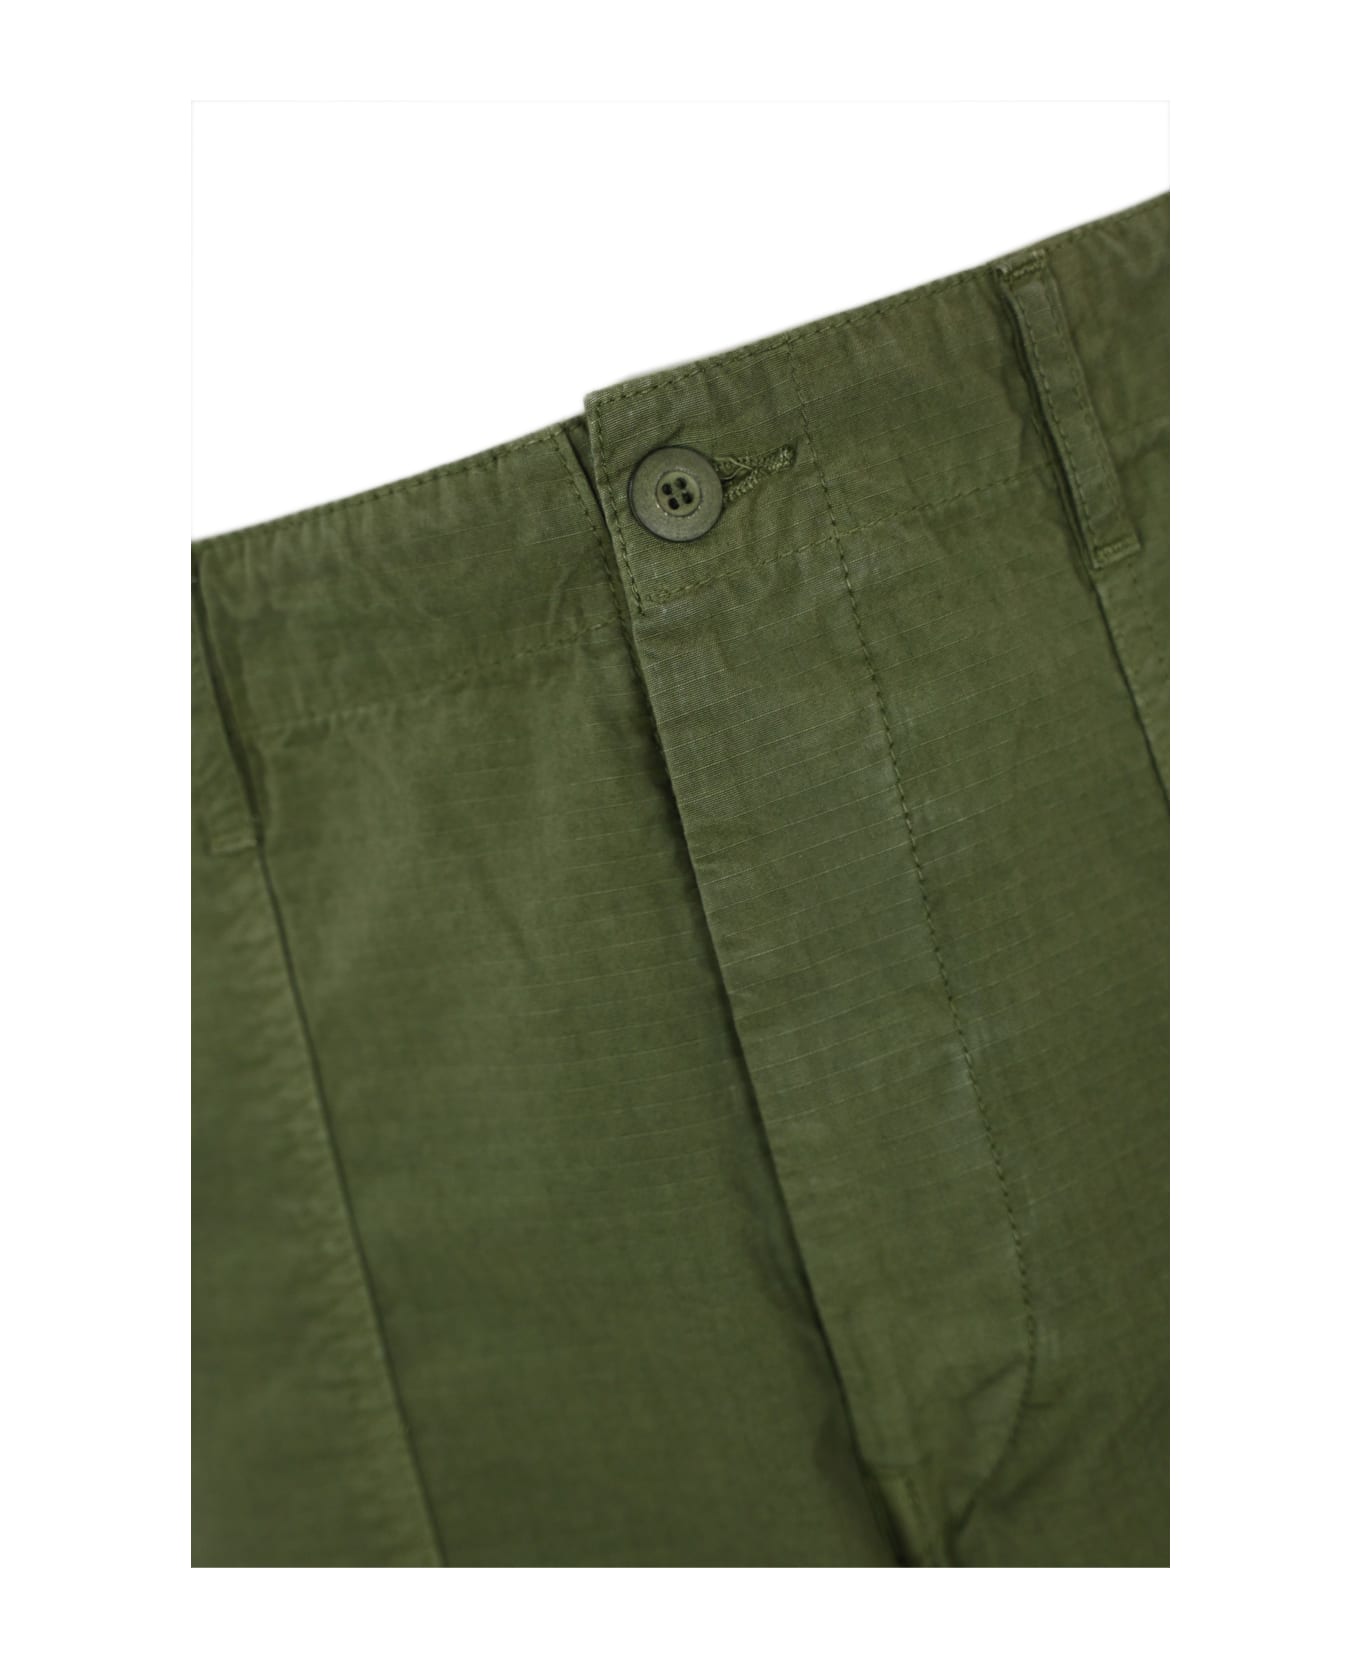 Roy Rogers Trousers With Big Pockets And Patches - Green ボトムス